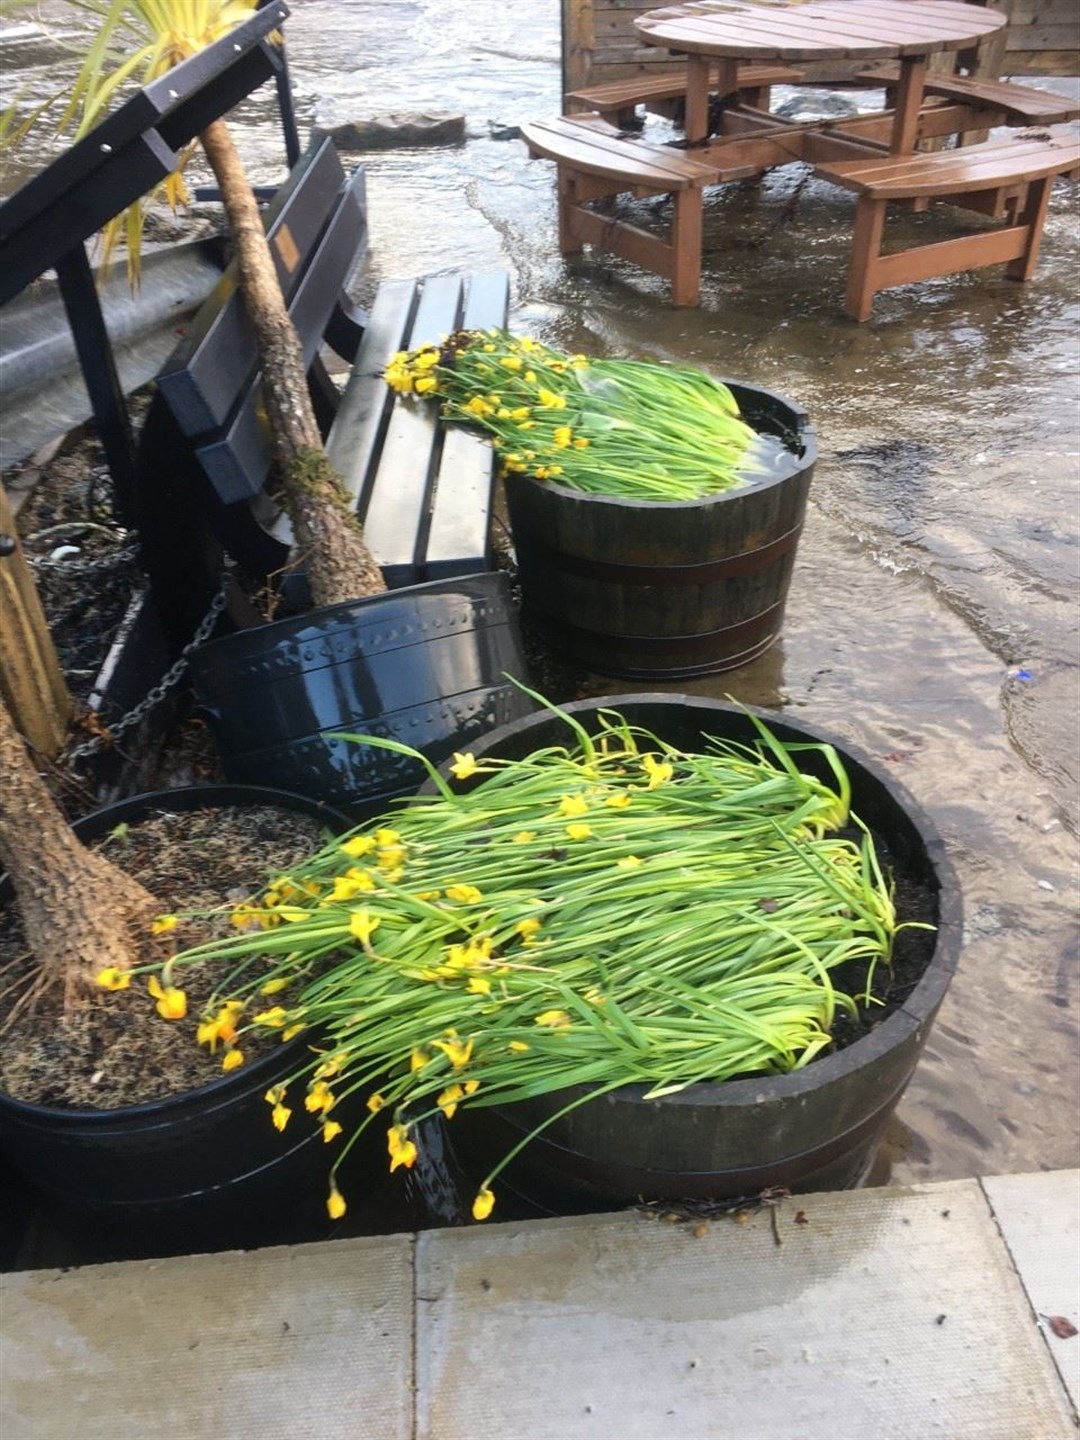 The daffodils took a hammering from the Spring surge.